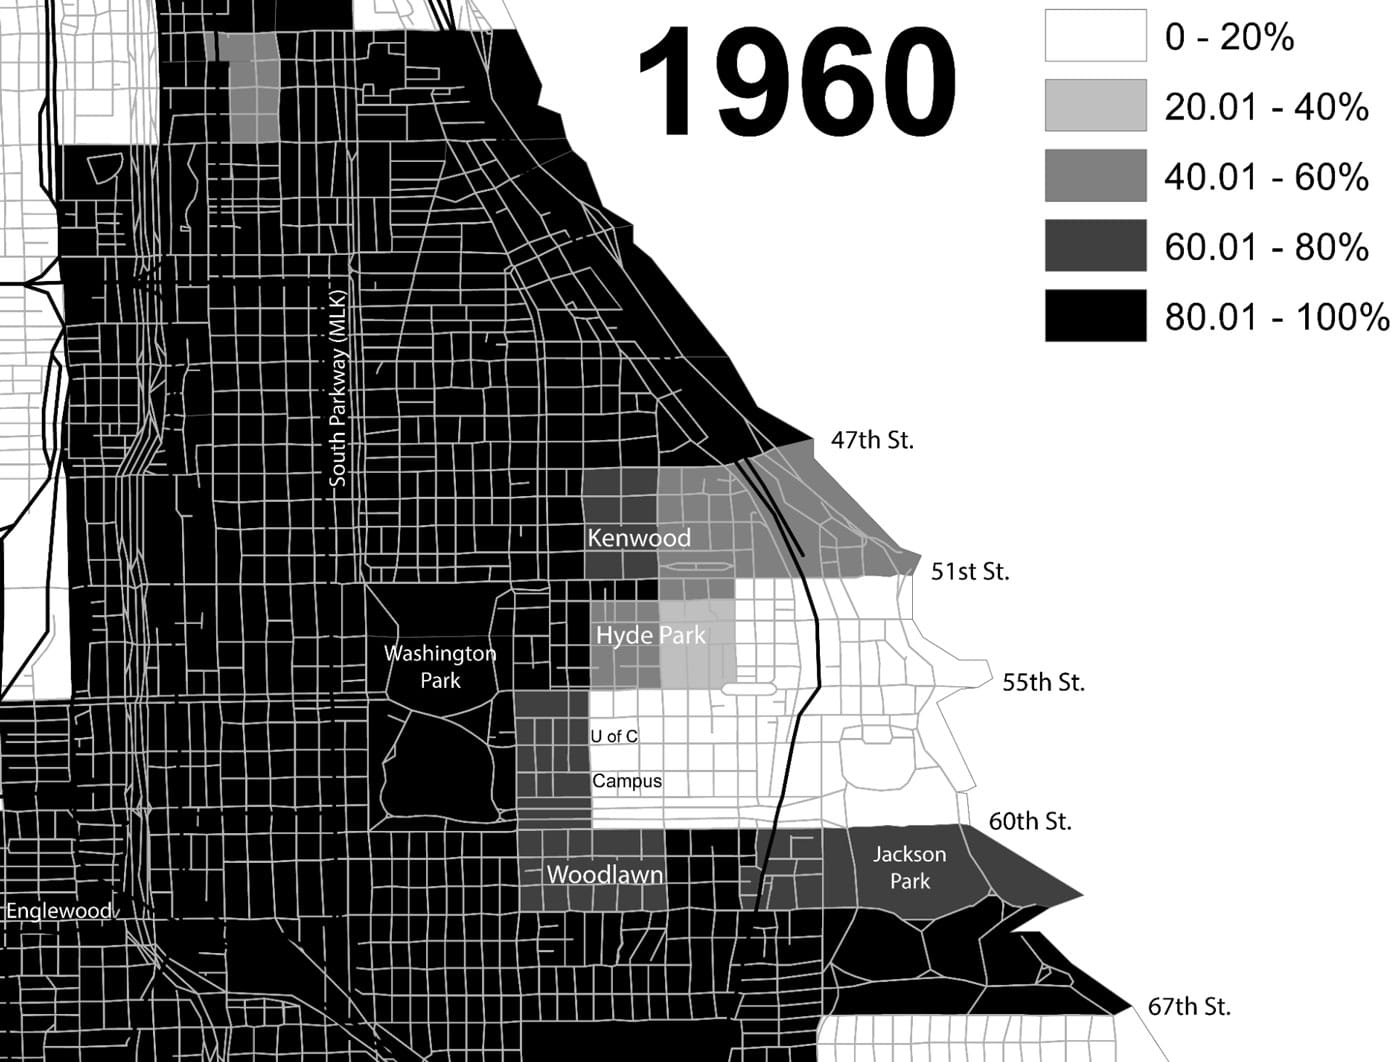 map showing Chicago in 1960 detailing population density by race